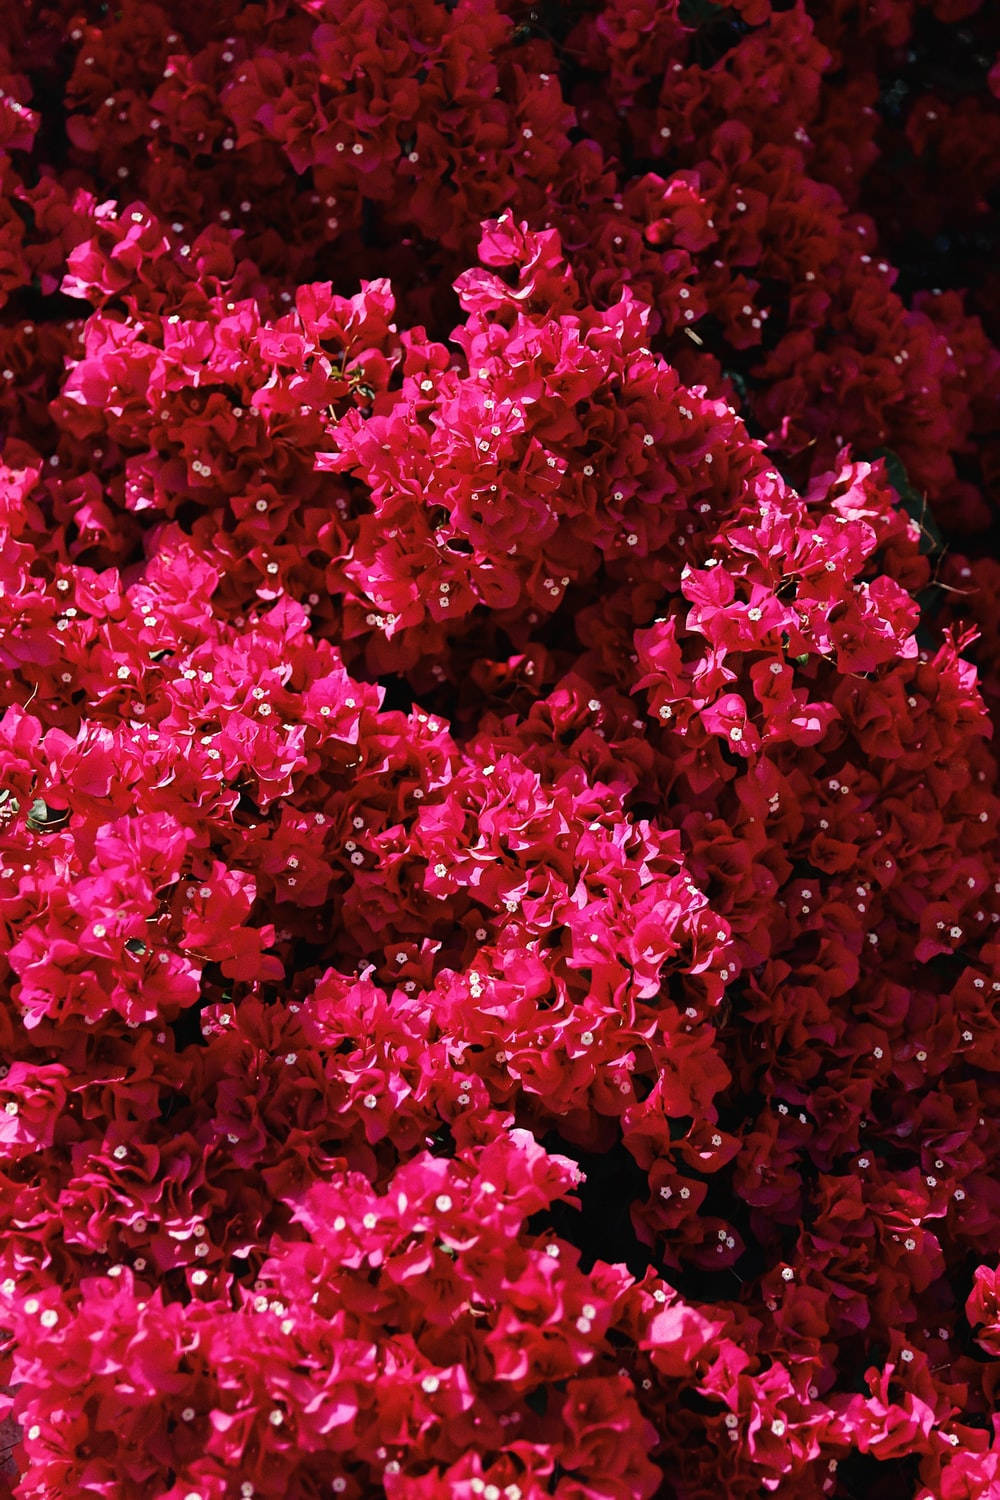 Violet Delight - A Stunning Display Of Bougainvillea Blooming Wallpaper